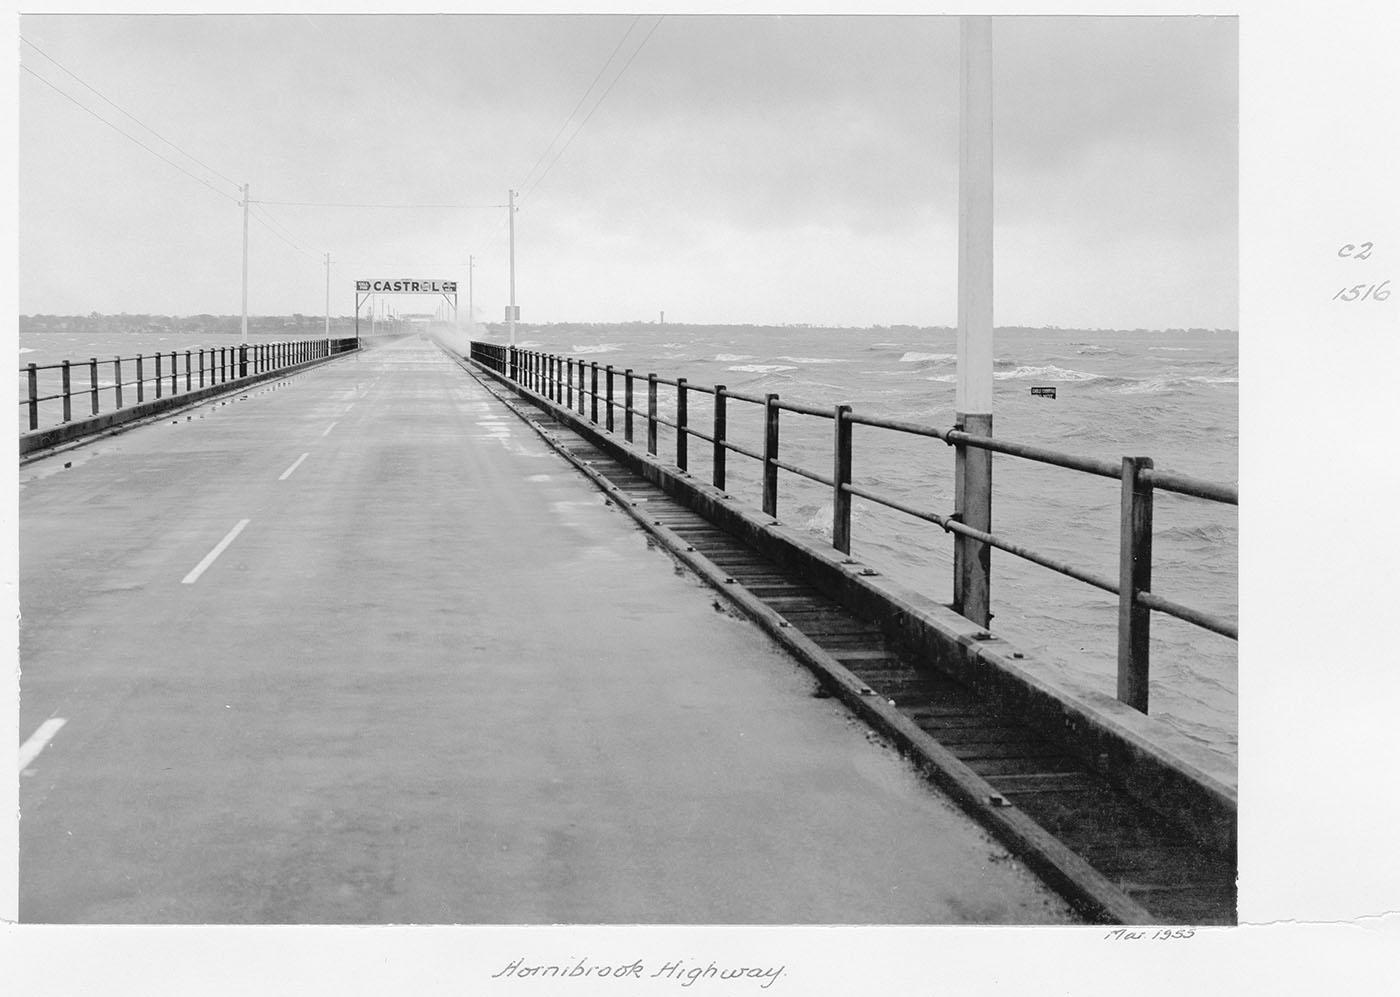 View from along the old Hornibrook Bridge towards Clontarf/Woody Point with Castrol banner sign in the distance.